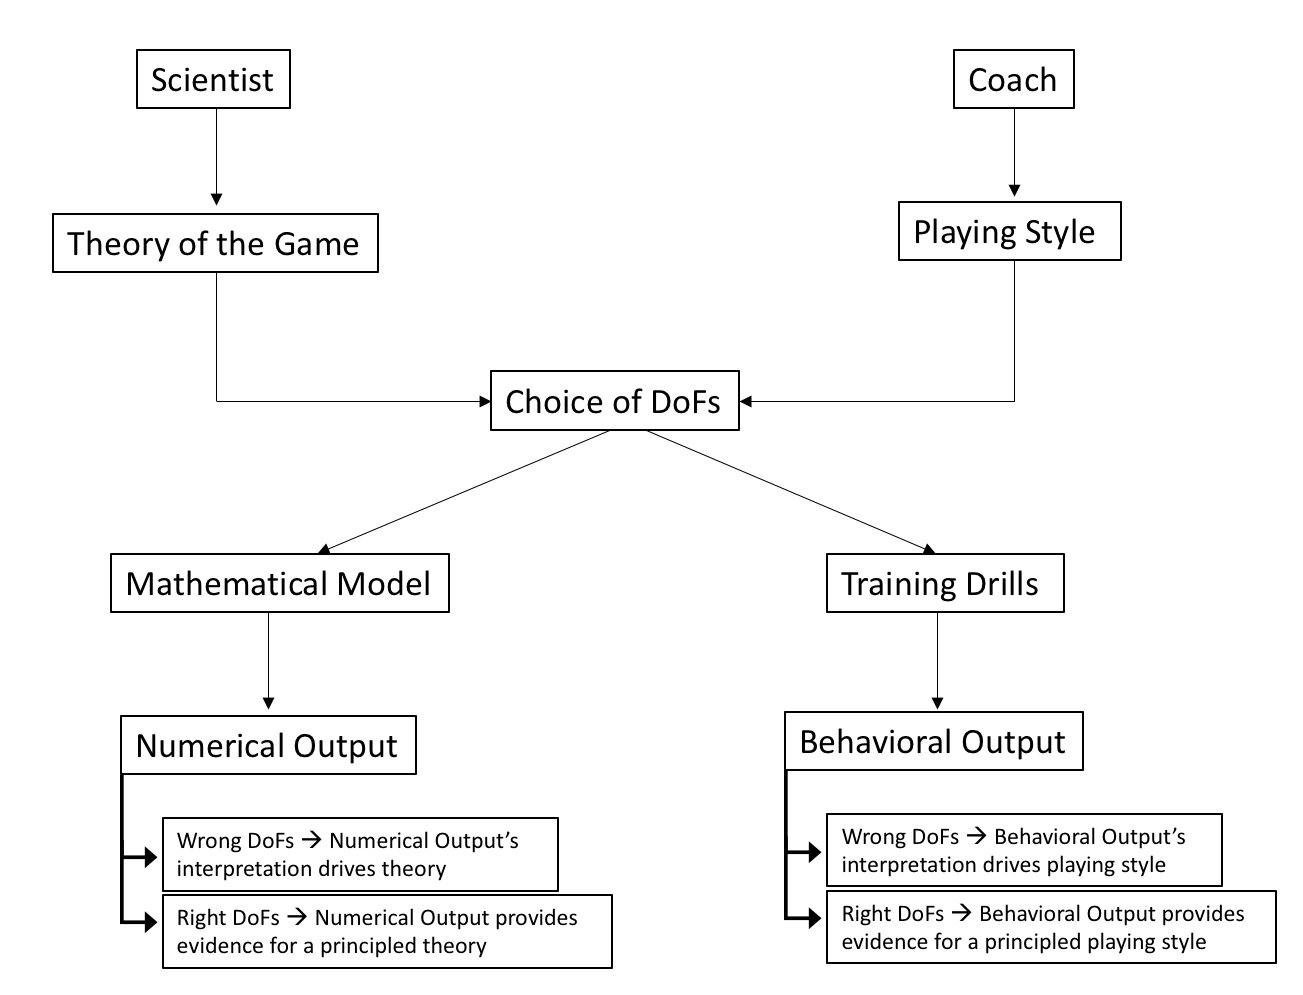 Figure 1. It represents the similar challenges that scientists and coaches have to face to work on the system of interest. In both cases, the incorrect choice of the degrees of freedom will radically change the output (i.e., numerical or behavioral) forcing (slaving) the scientist or coach to comprehend the output based on their choice of DoFs rather than serving as evidence for testable predictions of a principled theory/playing style.